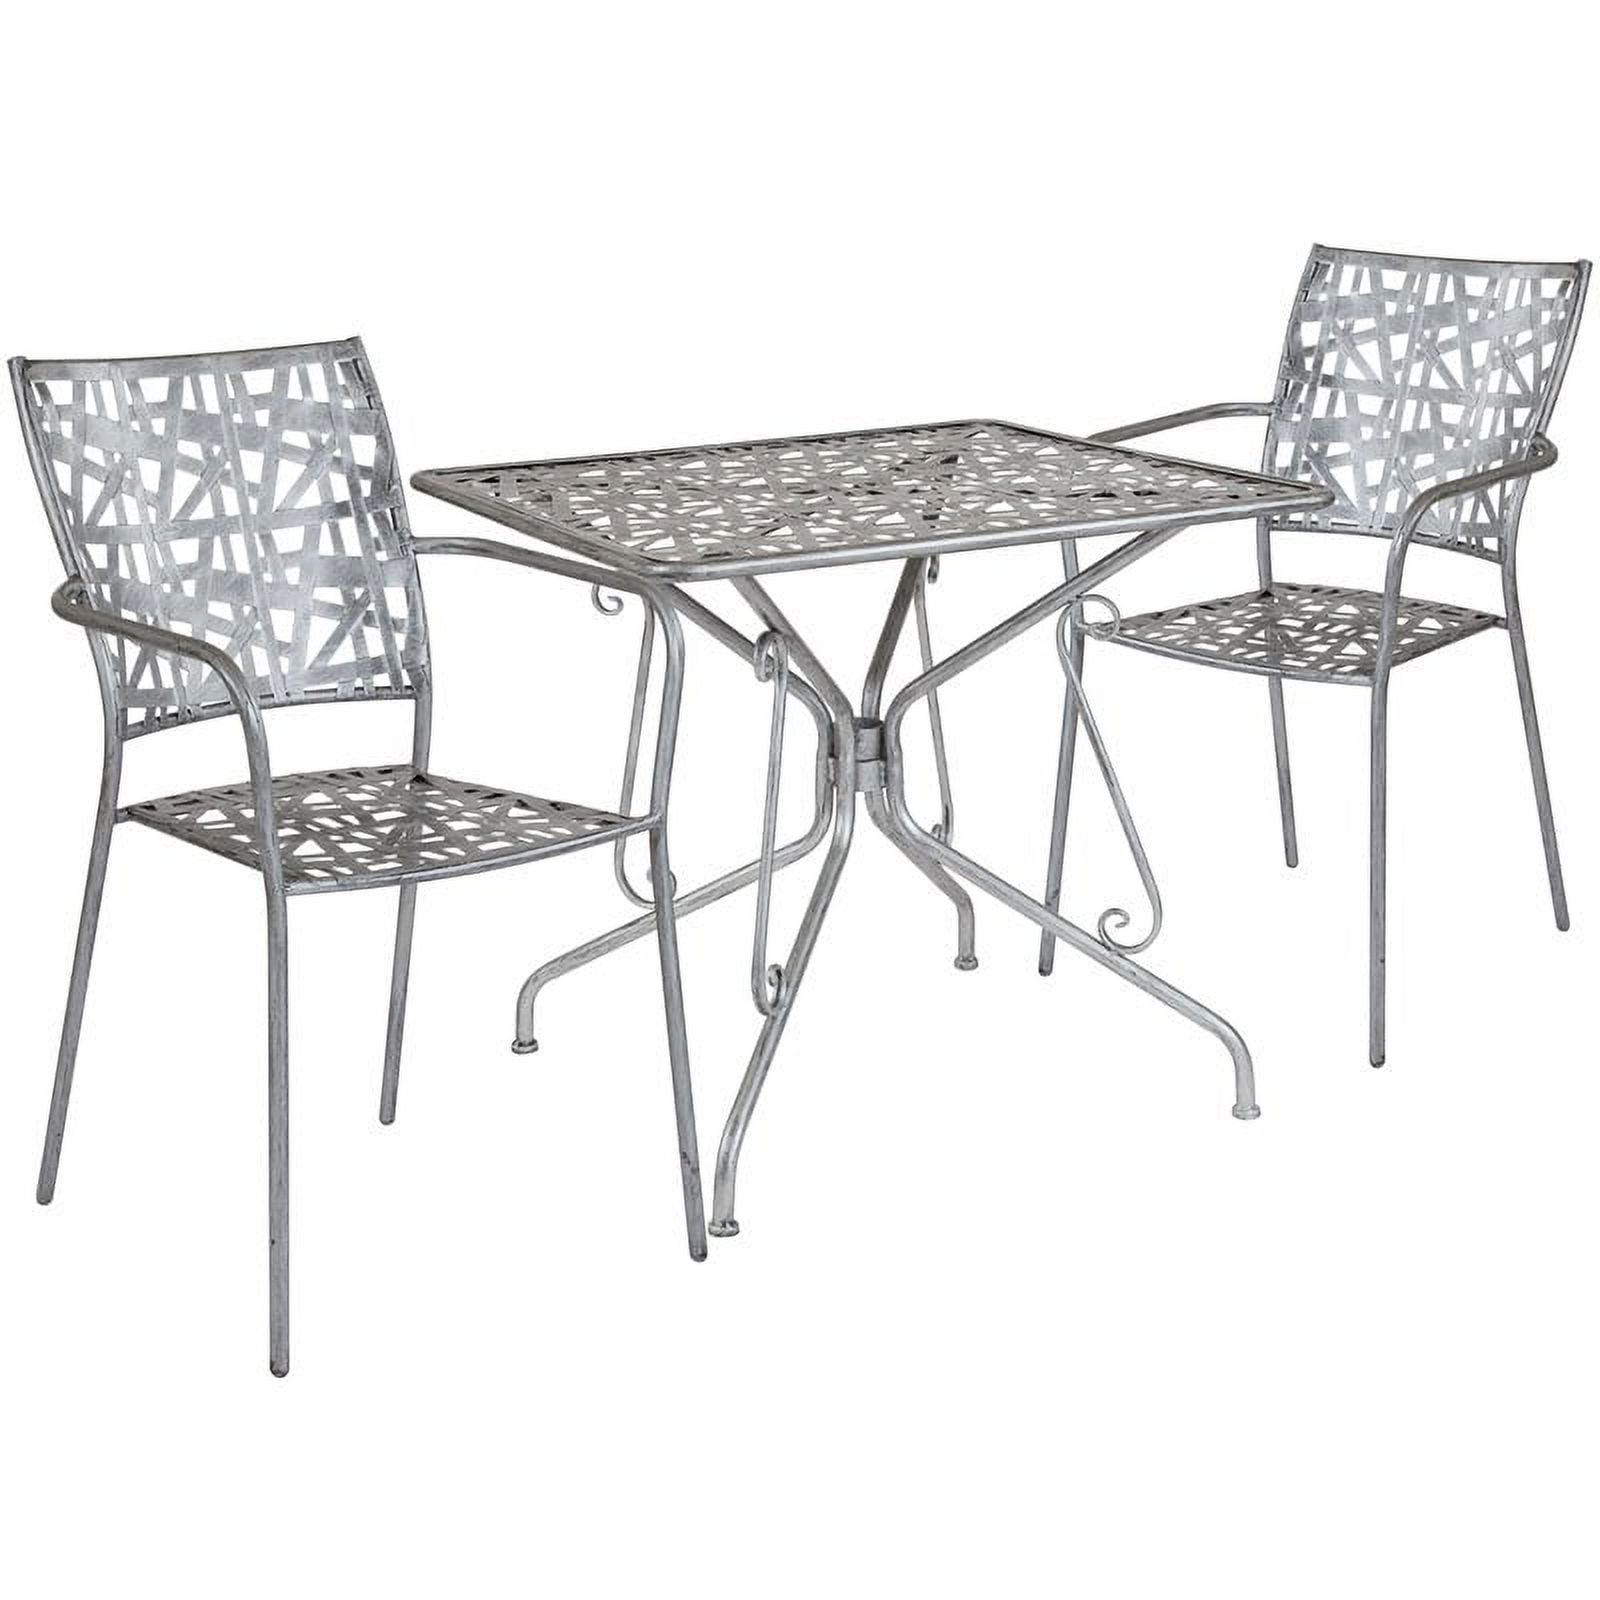 Flash Furniture Agostina Series 31.5" Square Antique Silver Indoor-Outdoor Steel Patio Table with 2 Stack Chairs - image 2 of 4